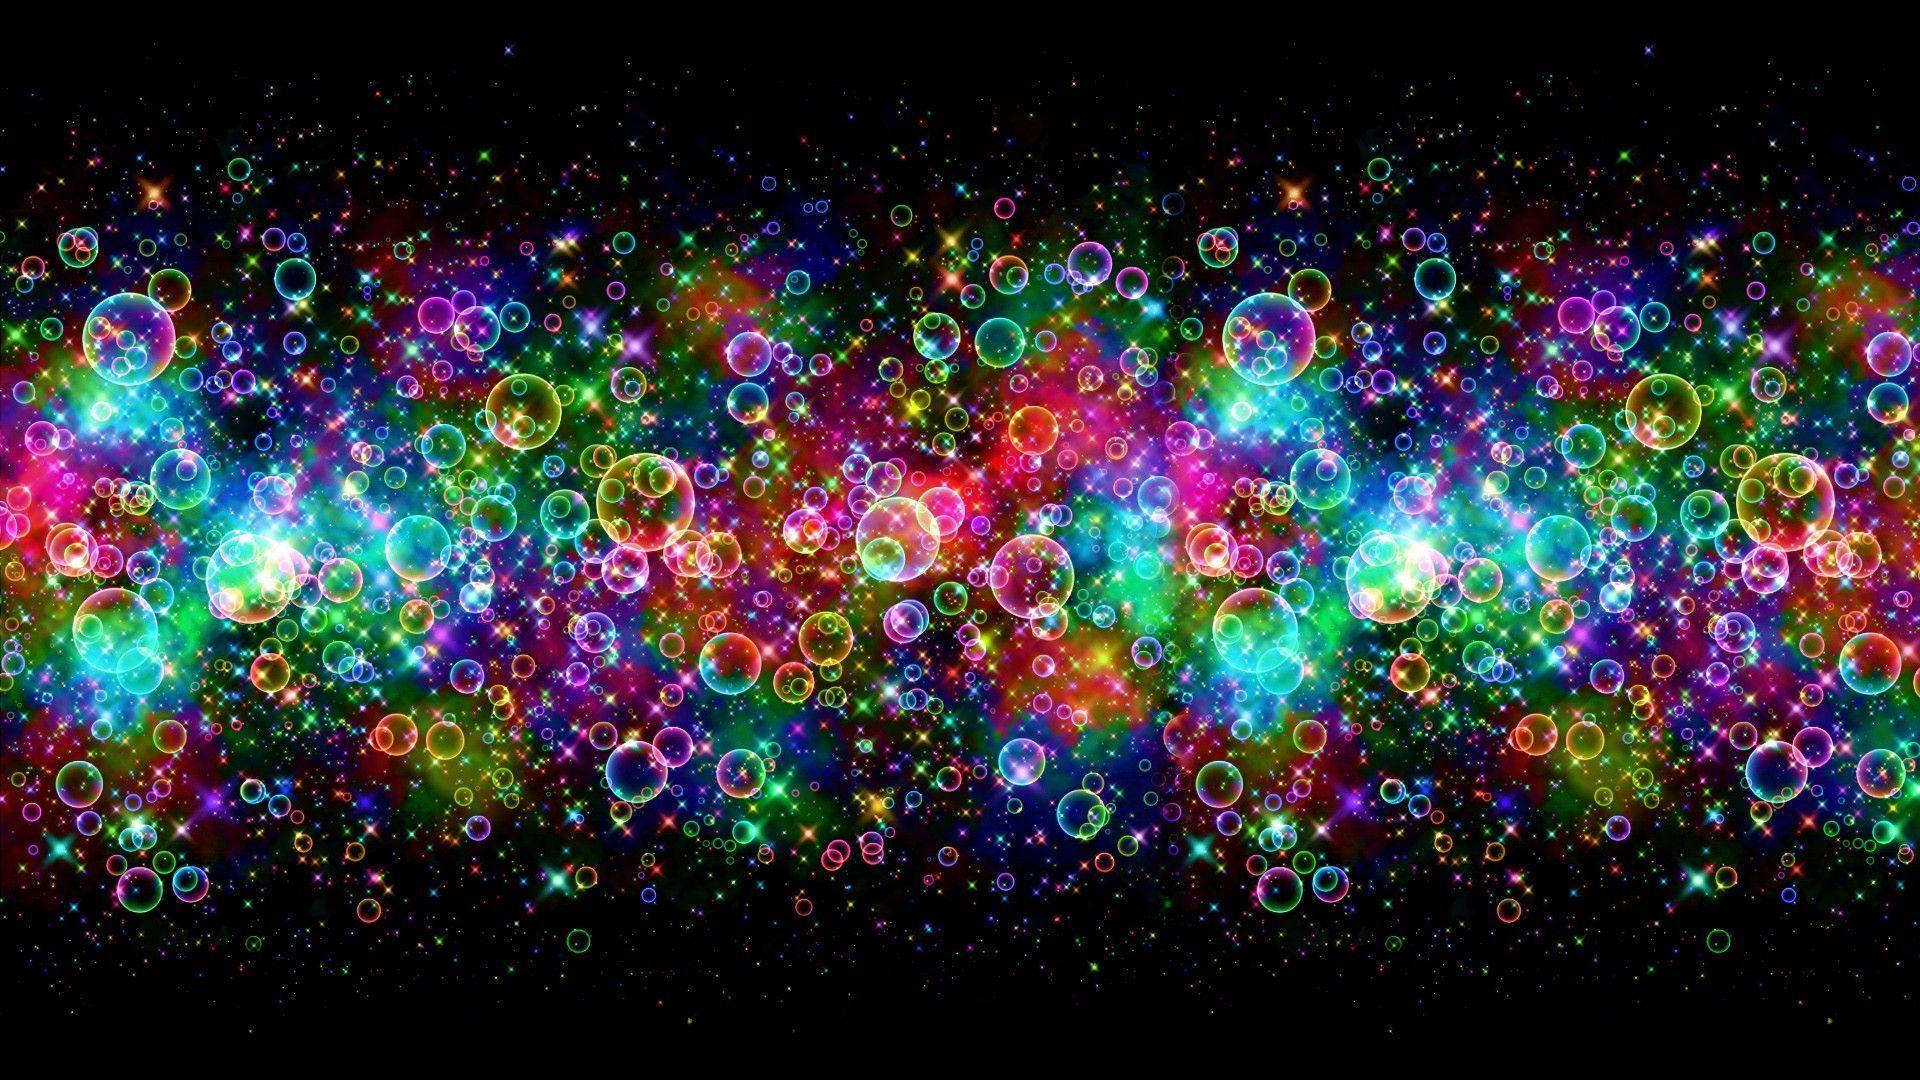 Abstract Sparkles Bubble Rainbows Wallpaper HD. Download High